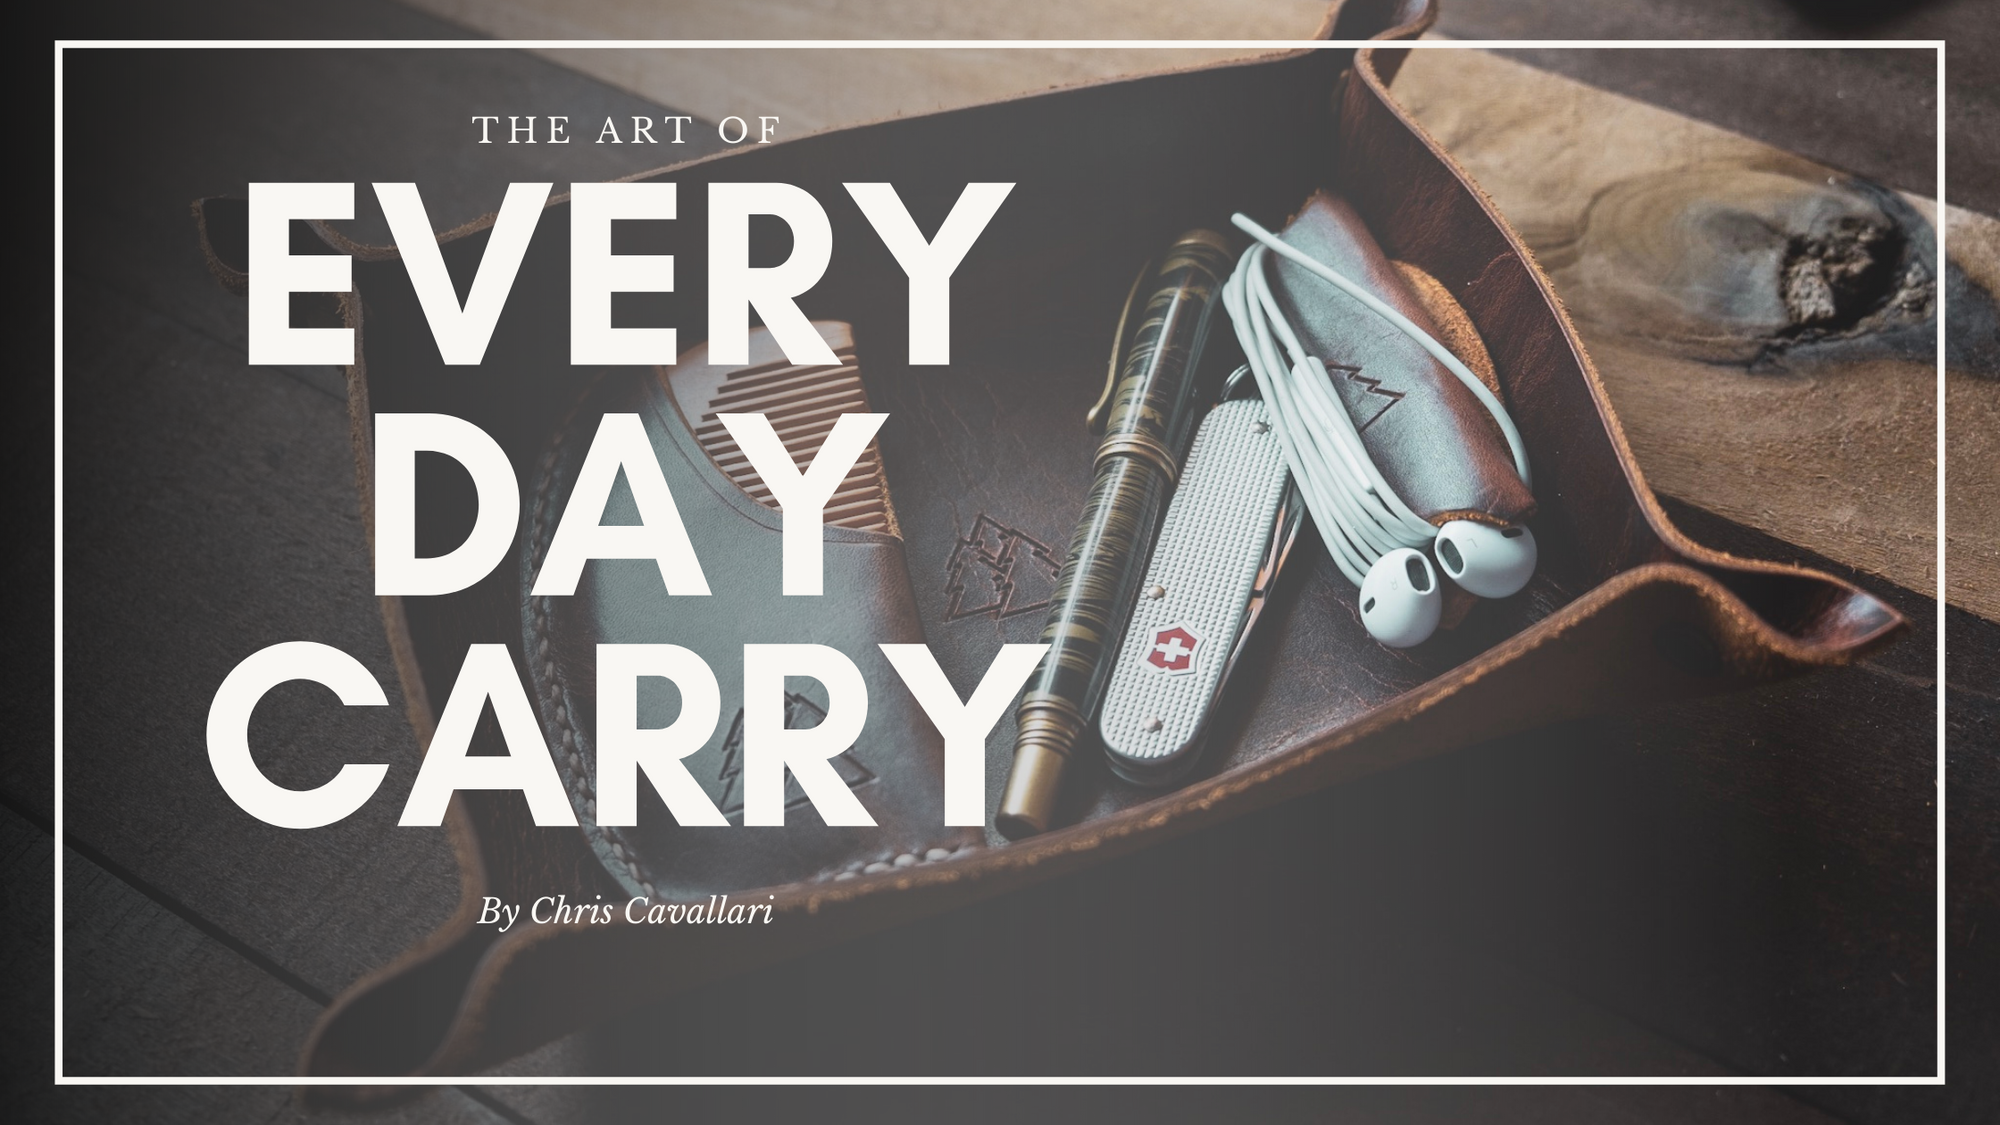 The Art of the Everyday Carry